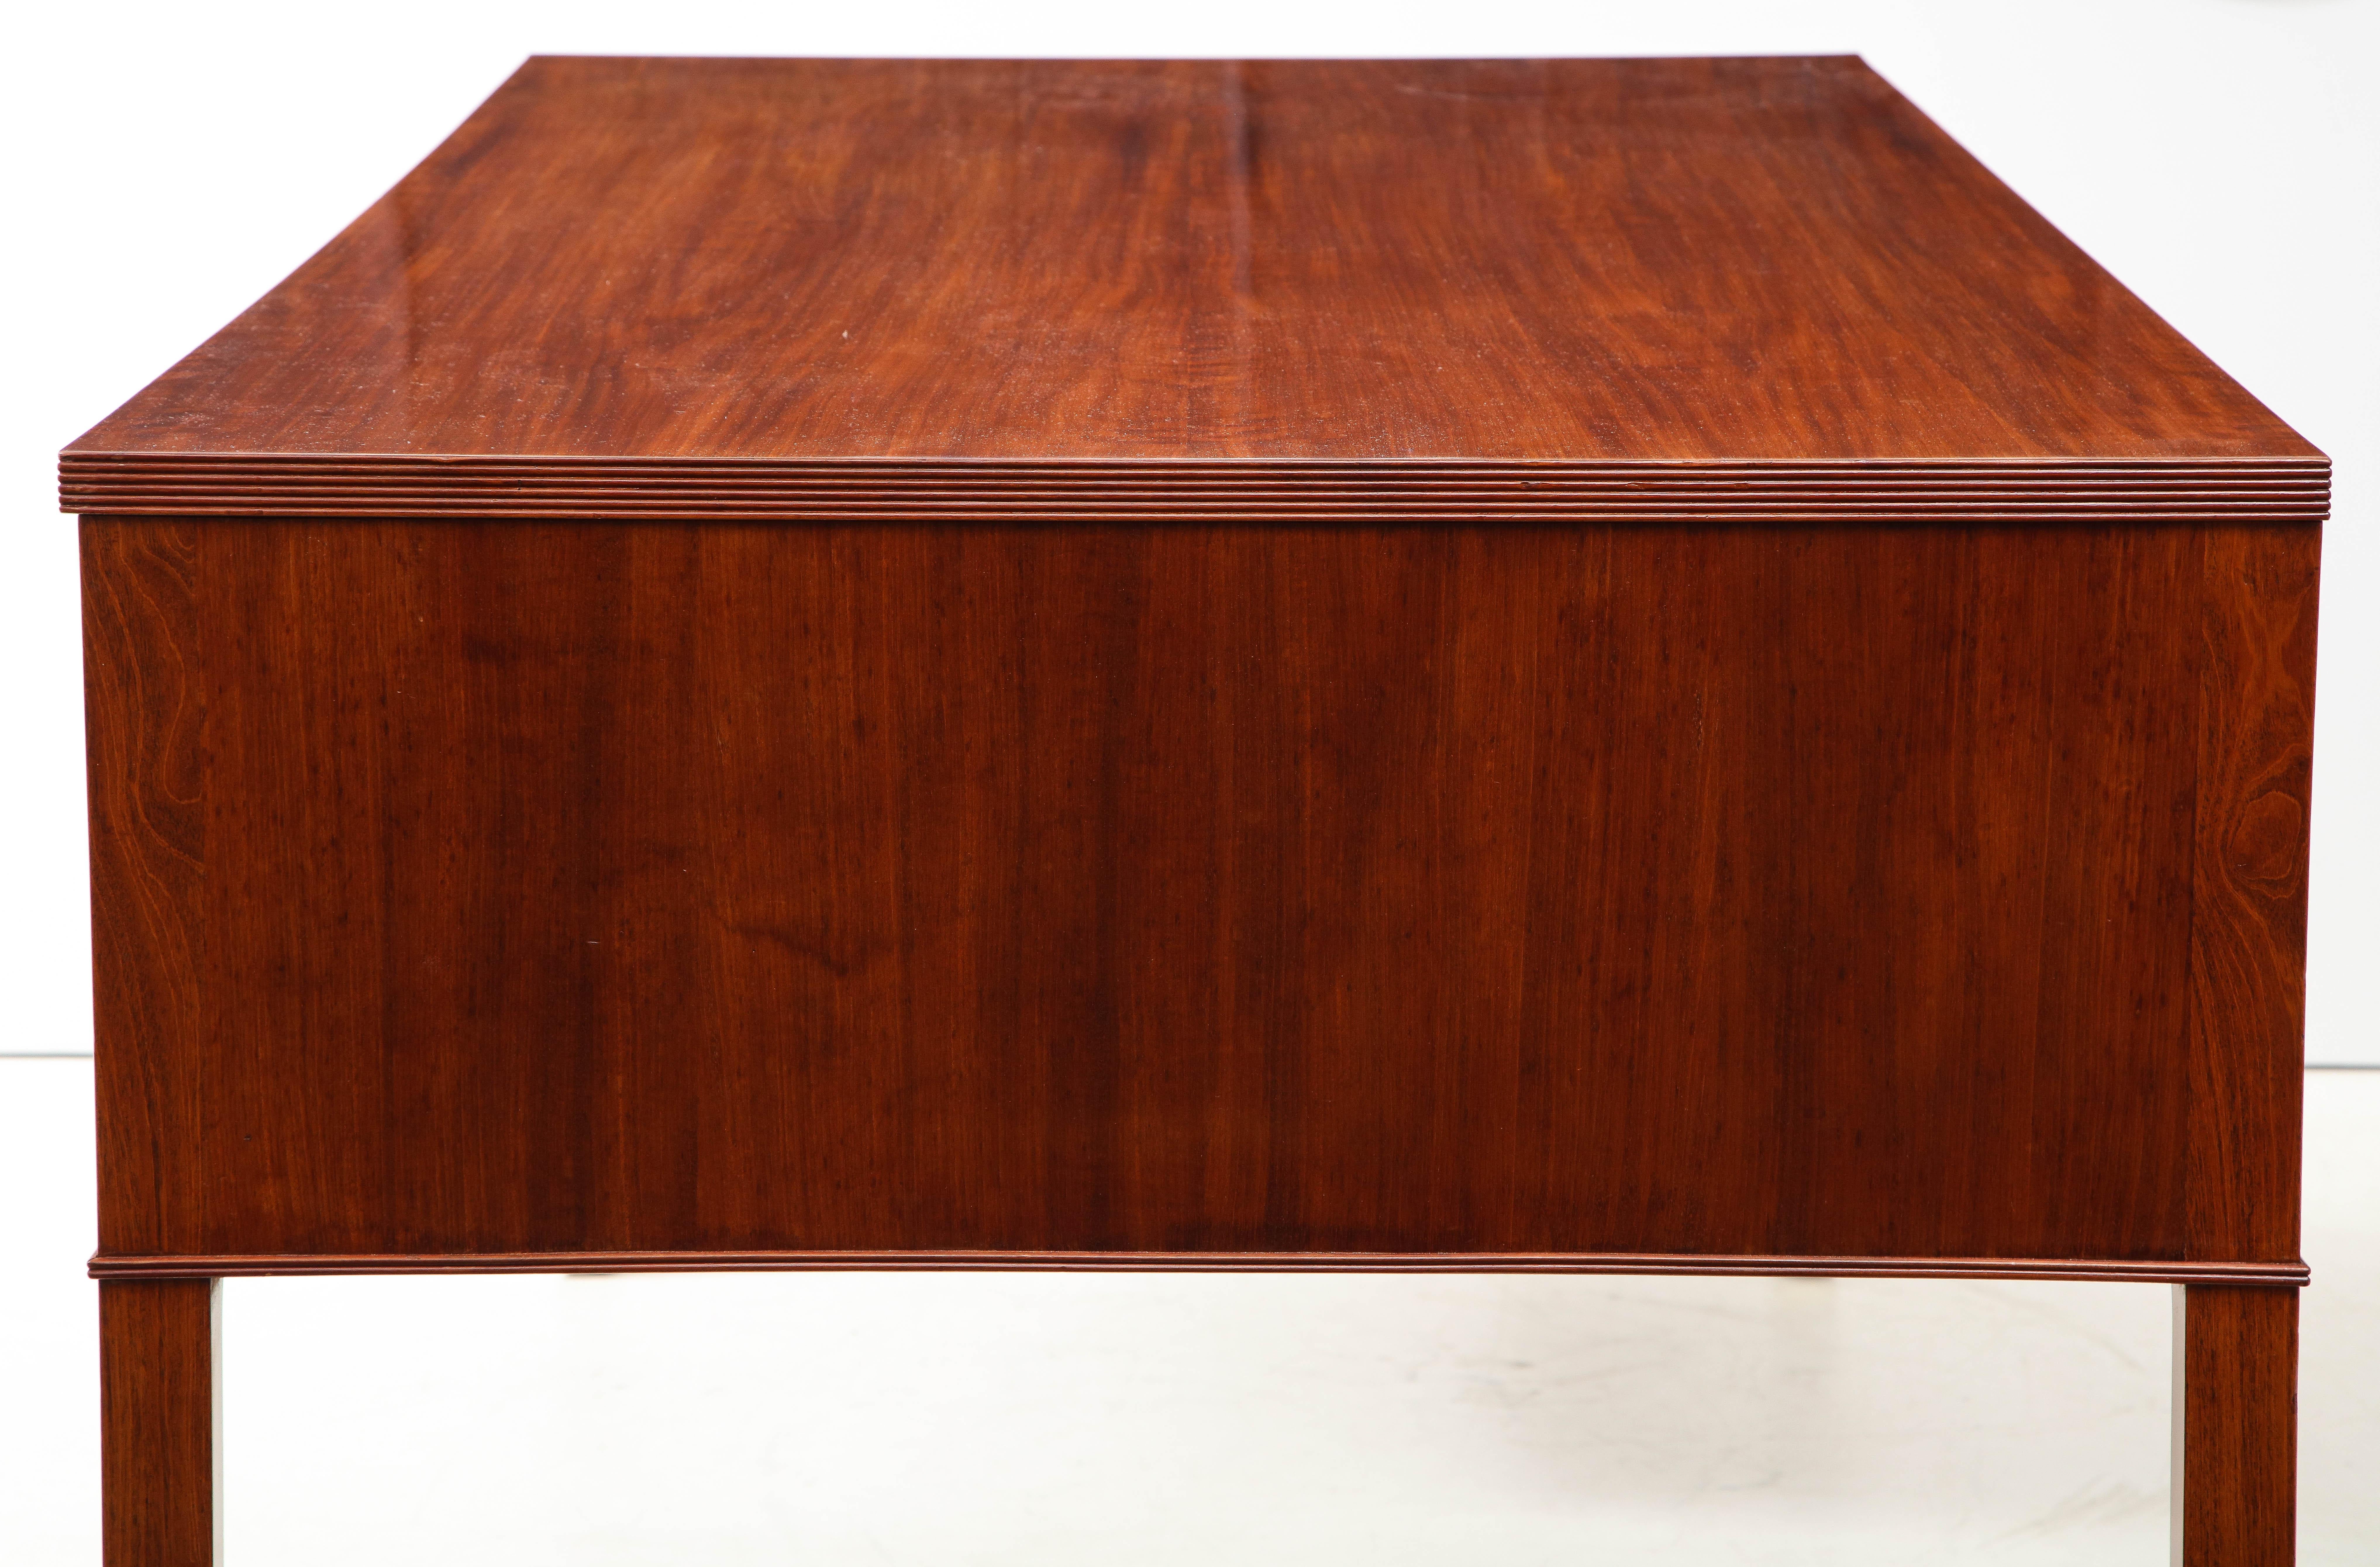 Ole Wanscher Mahogany Desk, circa 1950s, Produced by A. J. Iversen 1